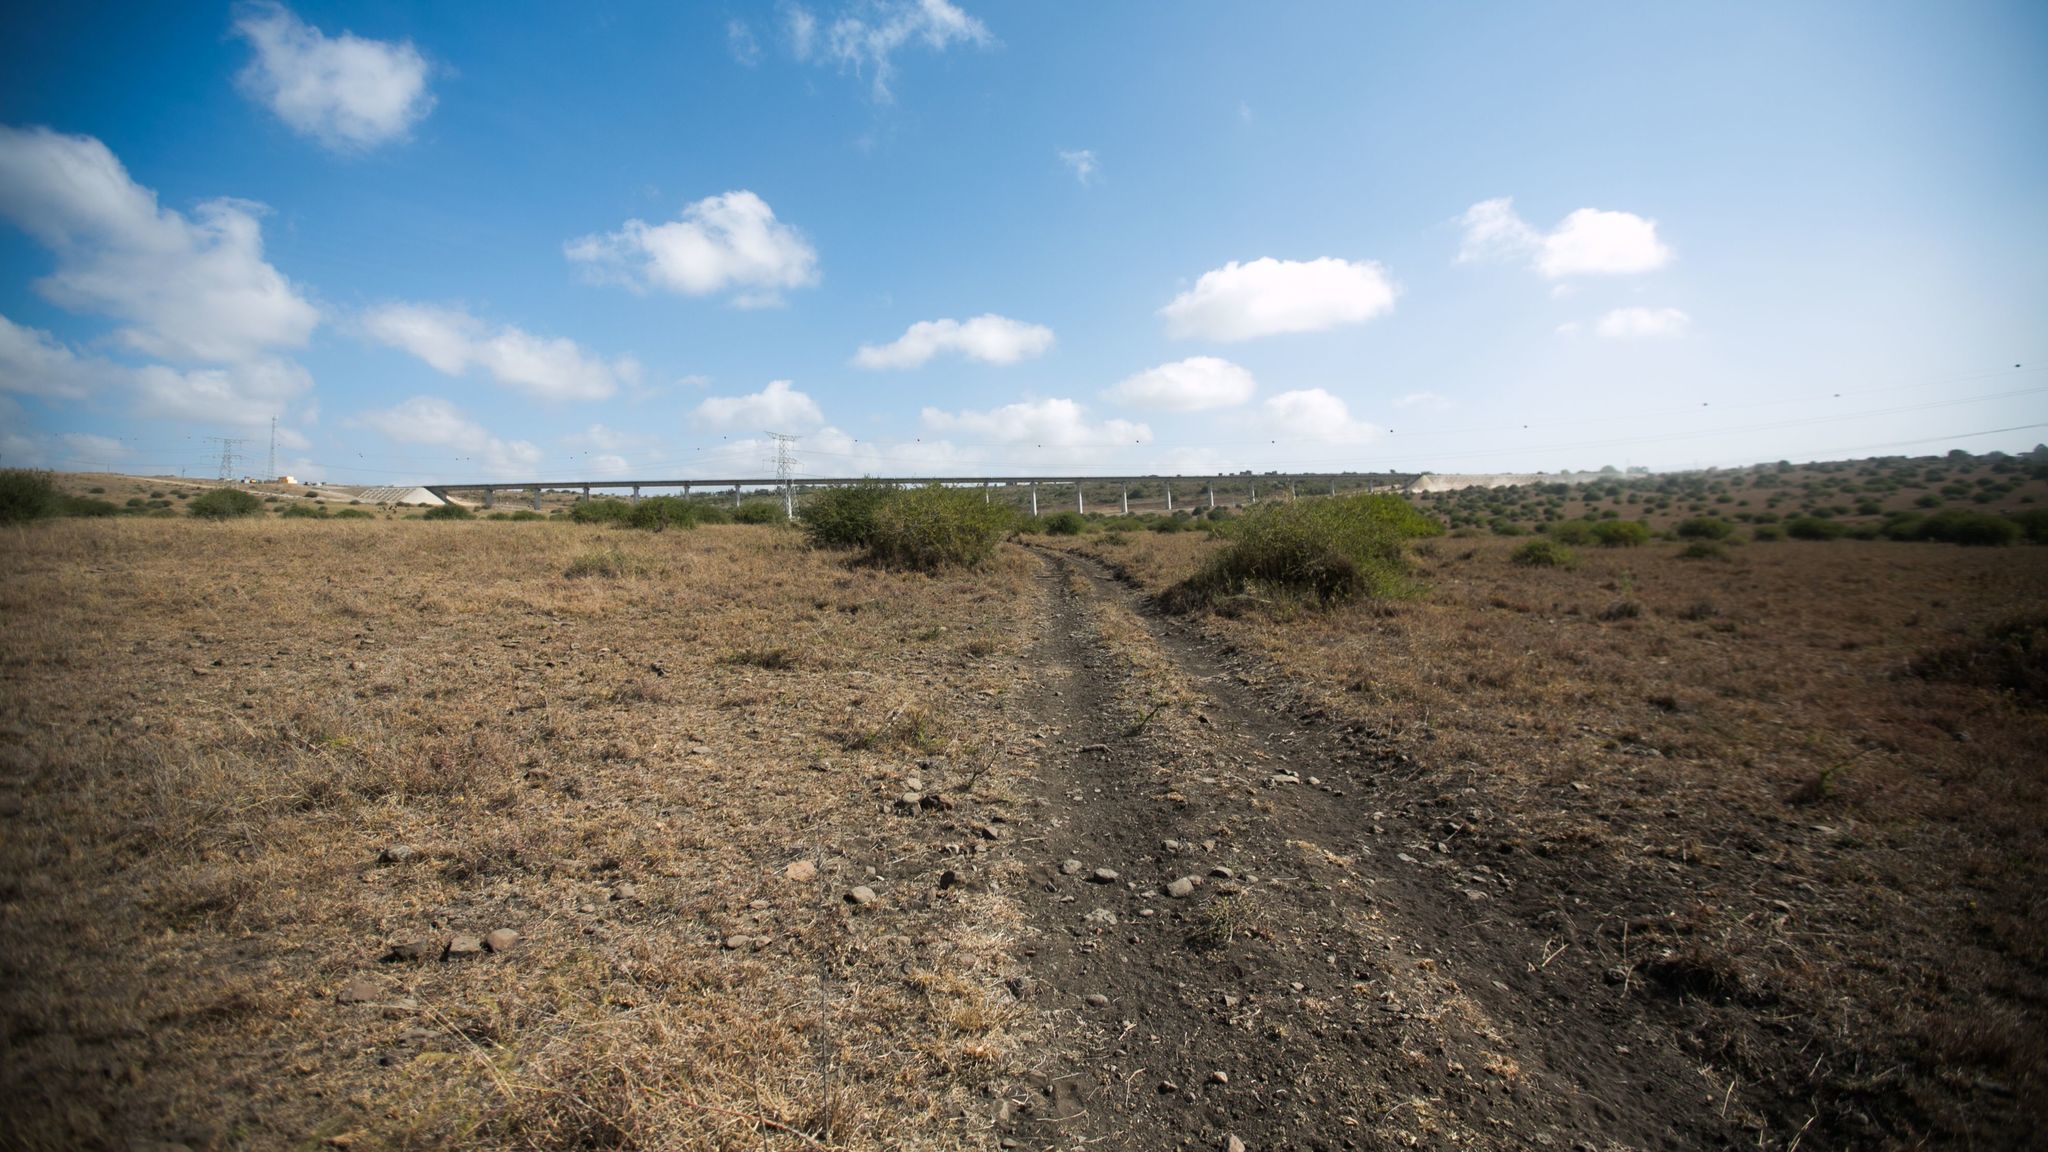 The Chinese-funded railway in Kenya from Nairobi to Mombasa cuts through part of the Nairobi National Park.